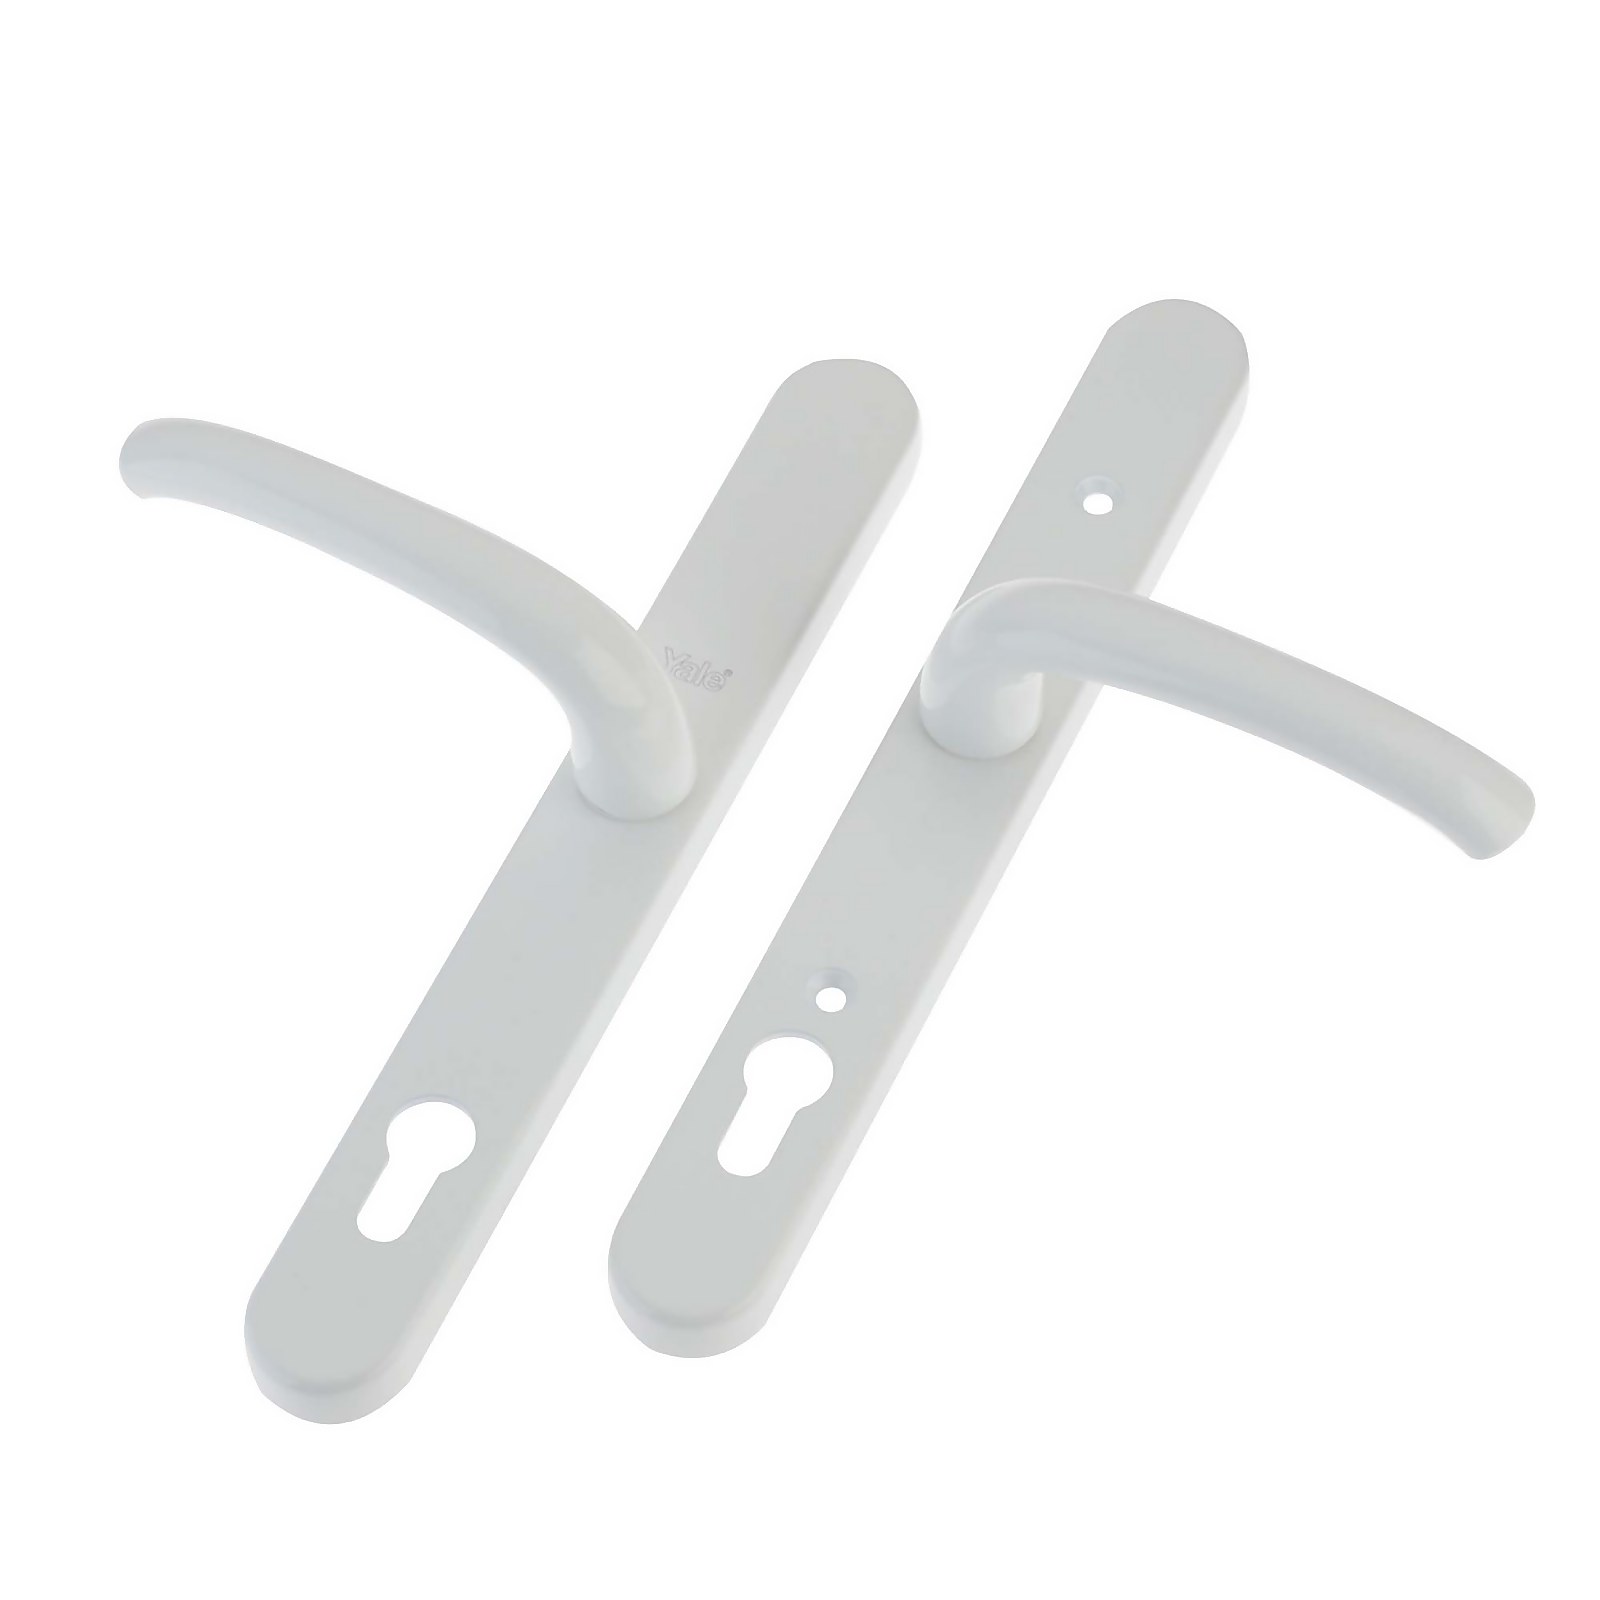 Photo of Yale Pvcu Replacement Door Handle - White